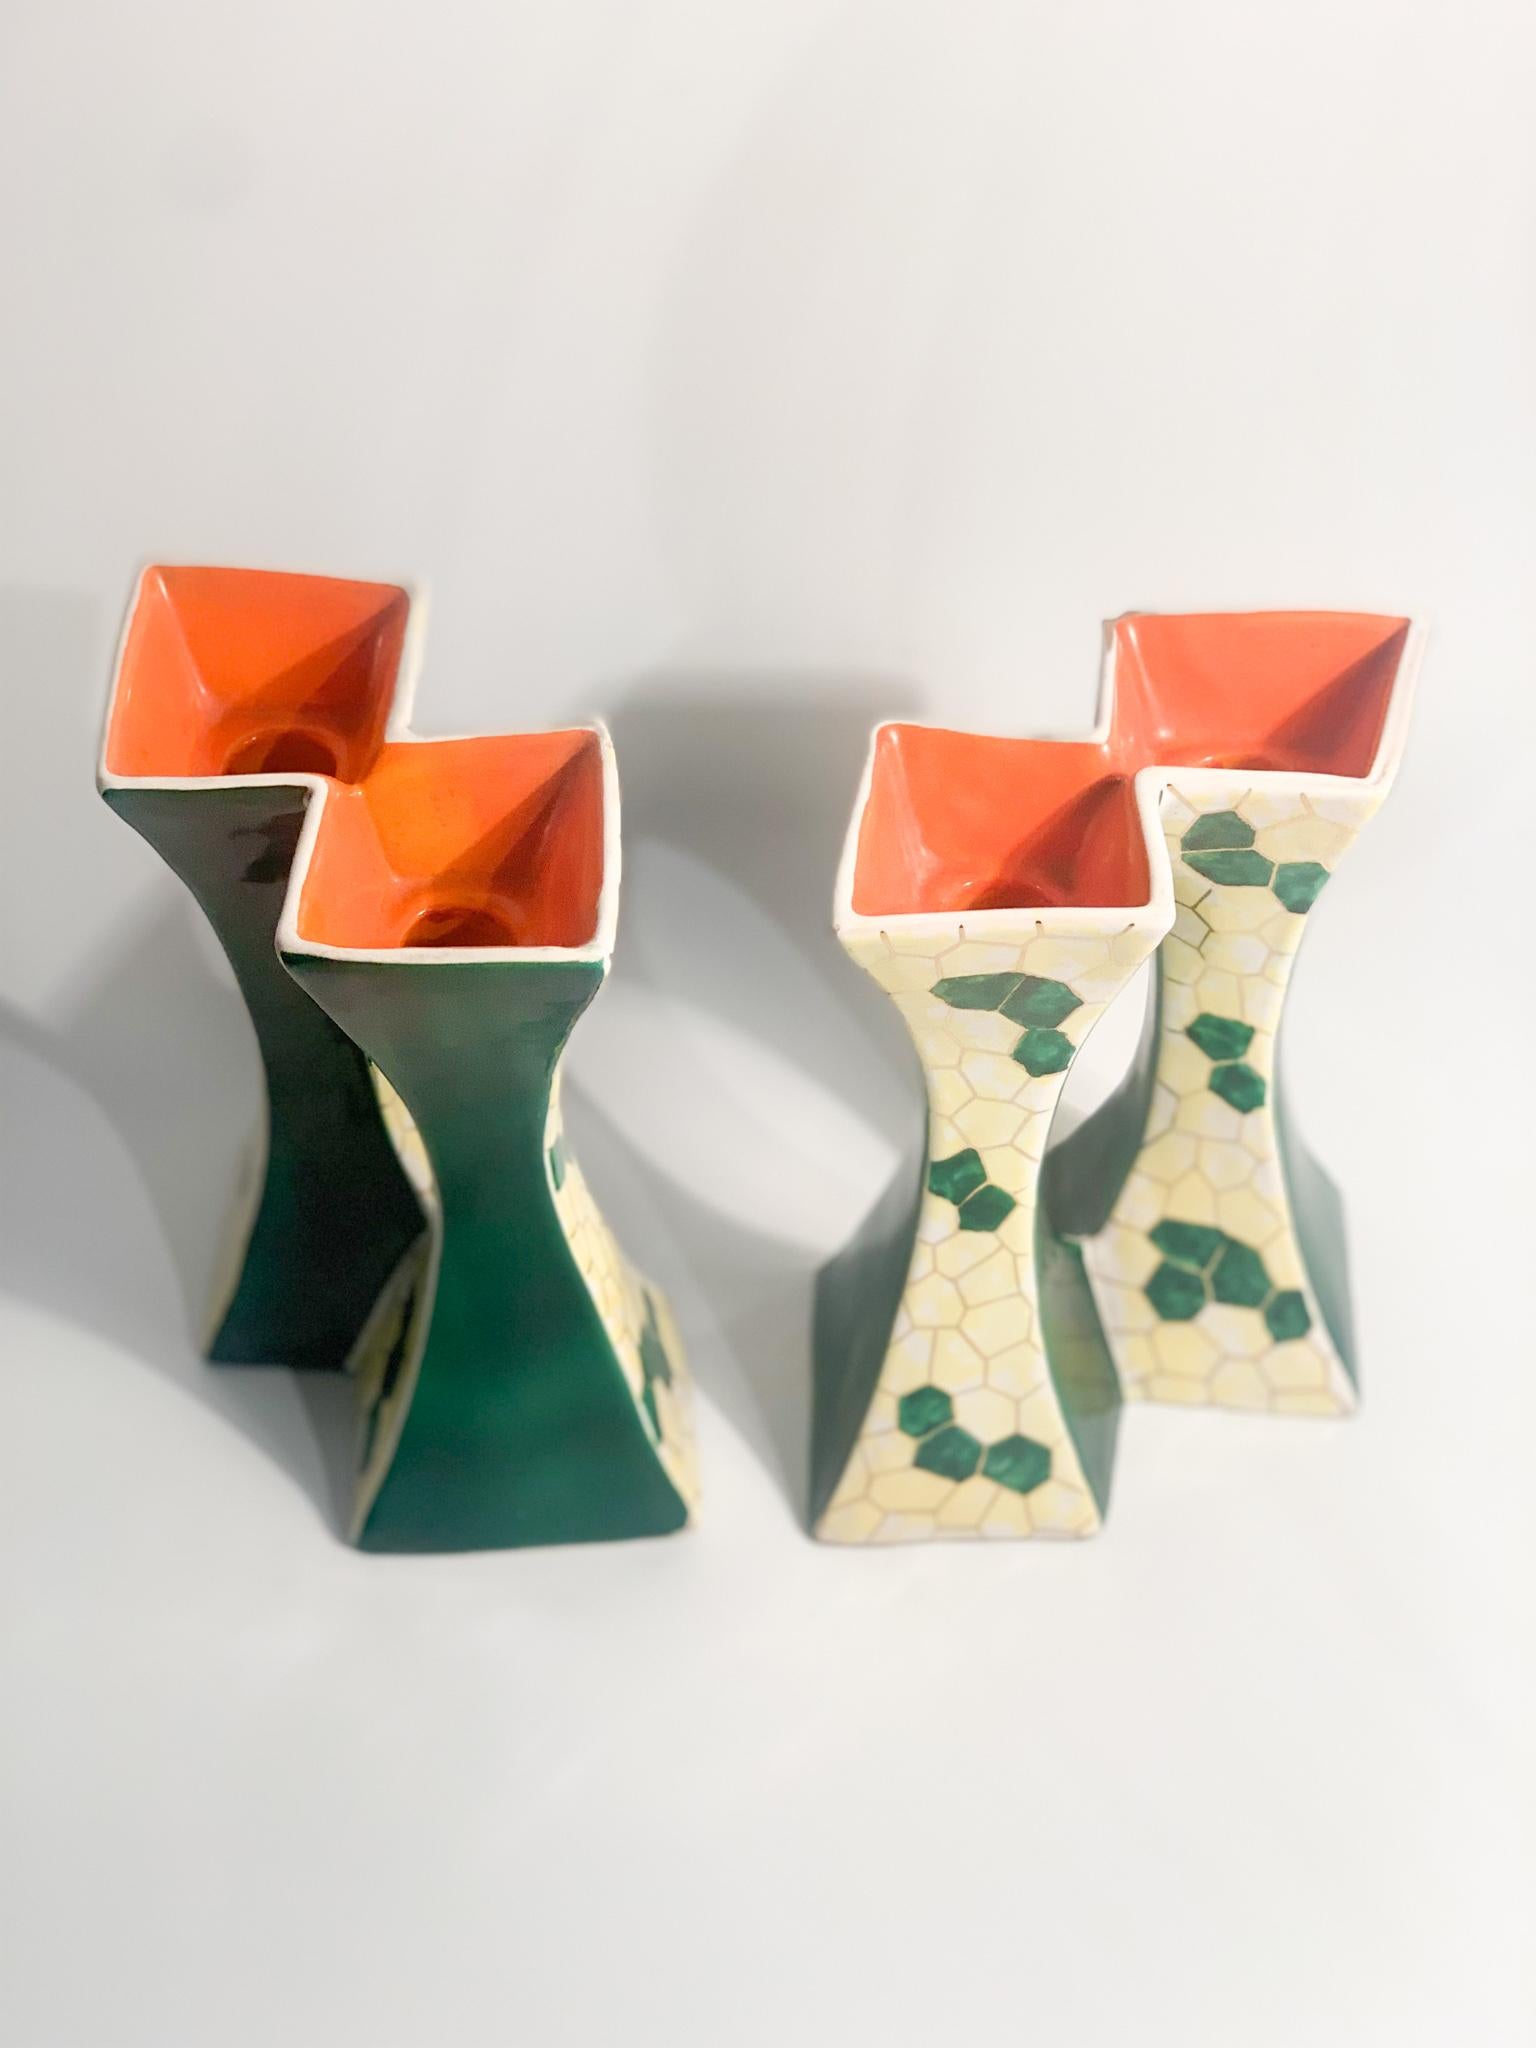 Mid-Century Modern Pair of Italian Ceramic Candle Holders by Pucci Umbertide from the 1950s